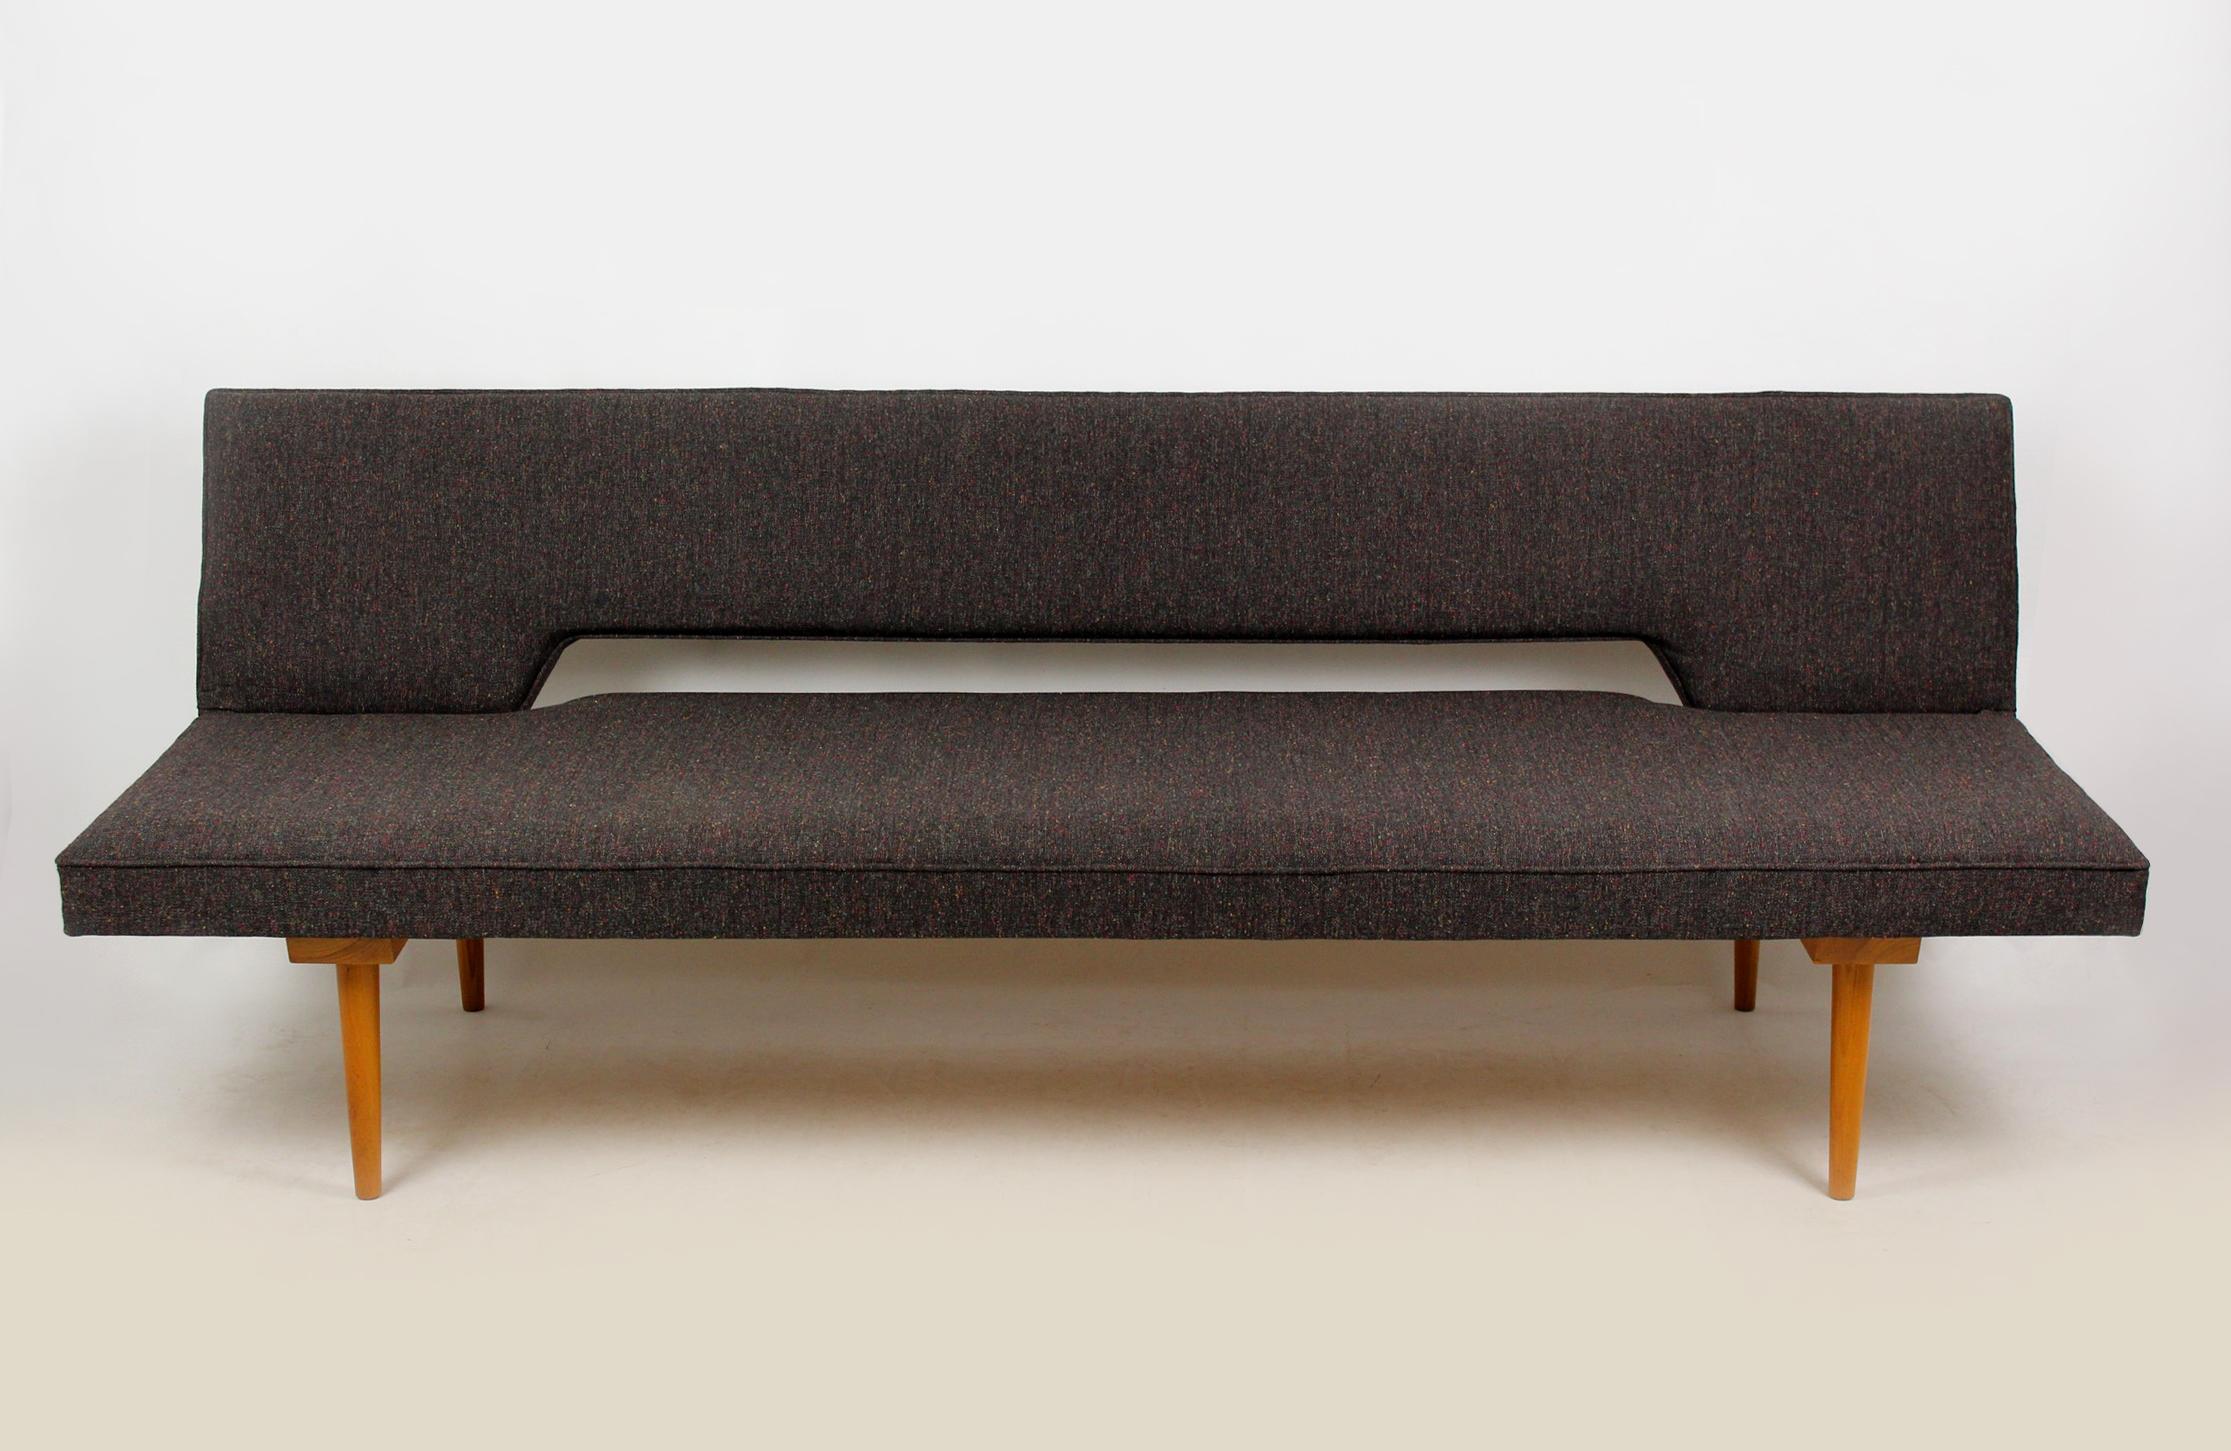 Midcentury sofa in a simple, minimalistic form. Designed by Miroslav Navratil in the 1960s/1970s. The couch simply converts into a daybed (195x85cm). Completely restored – woodwork has been refinished in satin, pillows have been upholstered with new